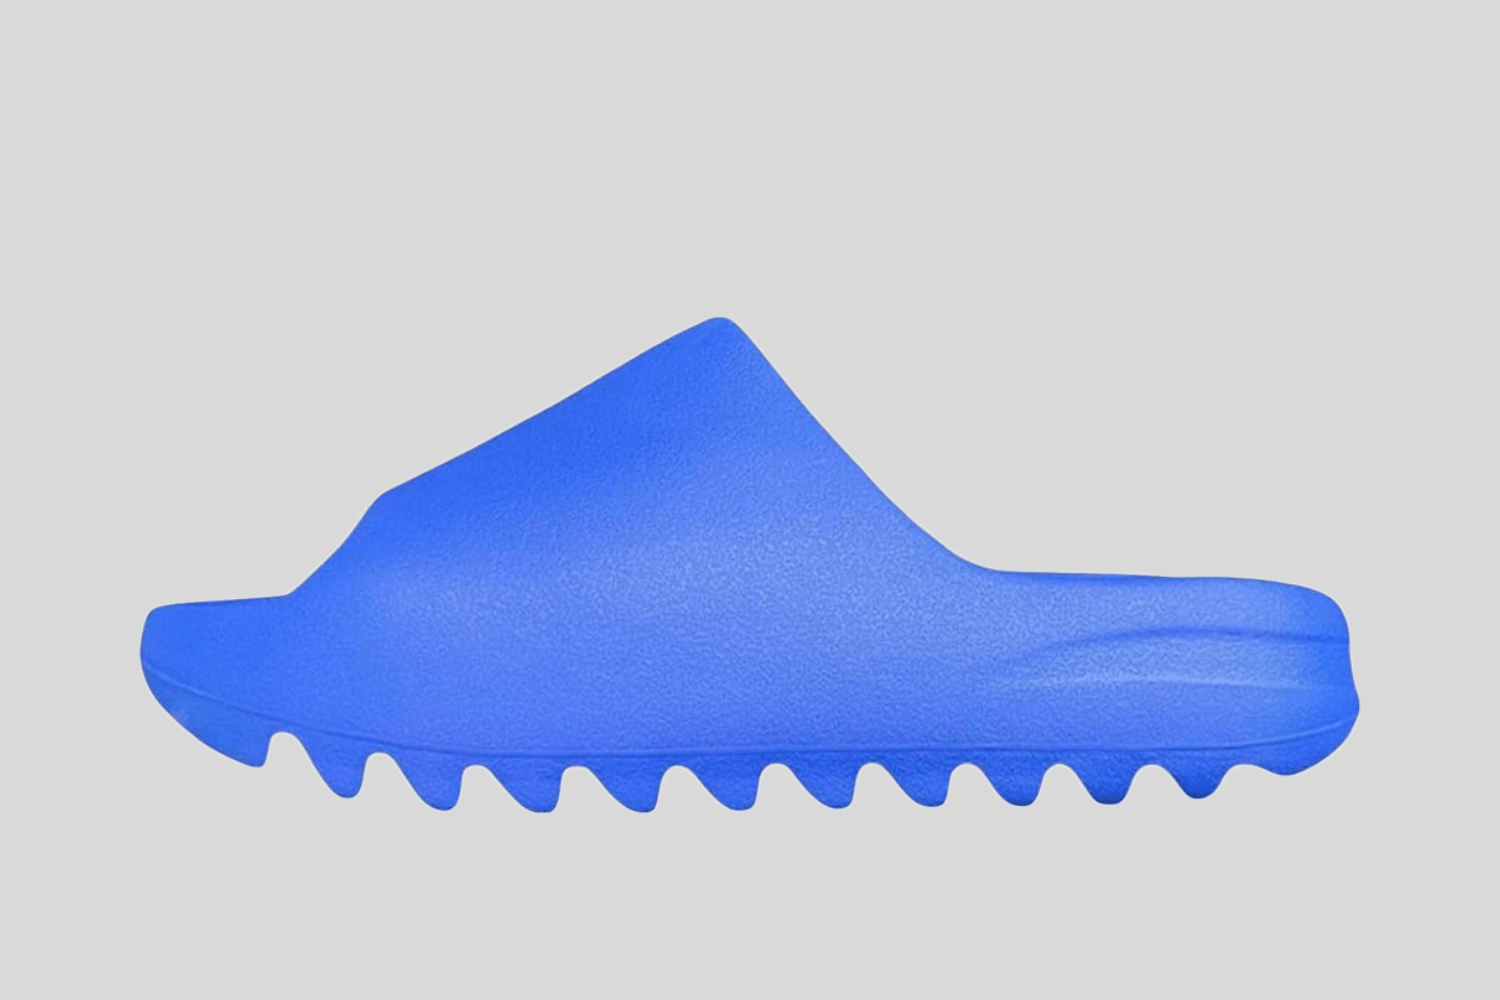 The Yeezy Slide arrives in an 'Azure' colorway